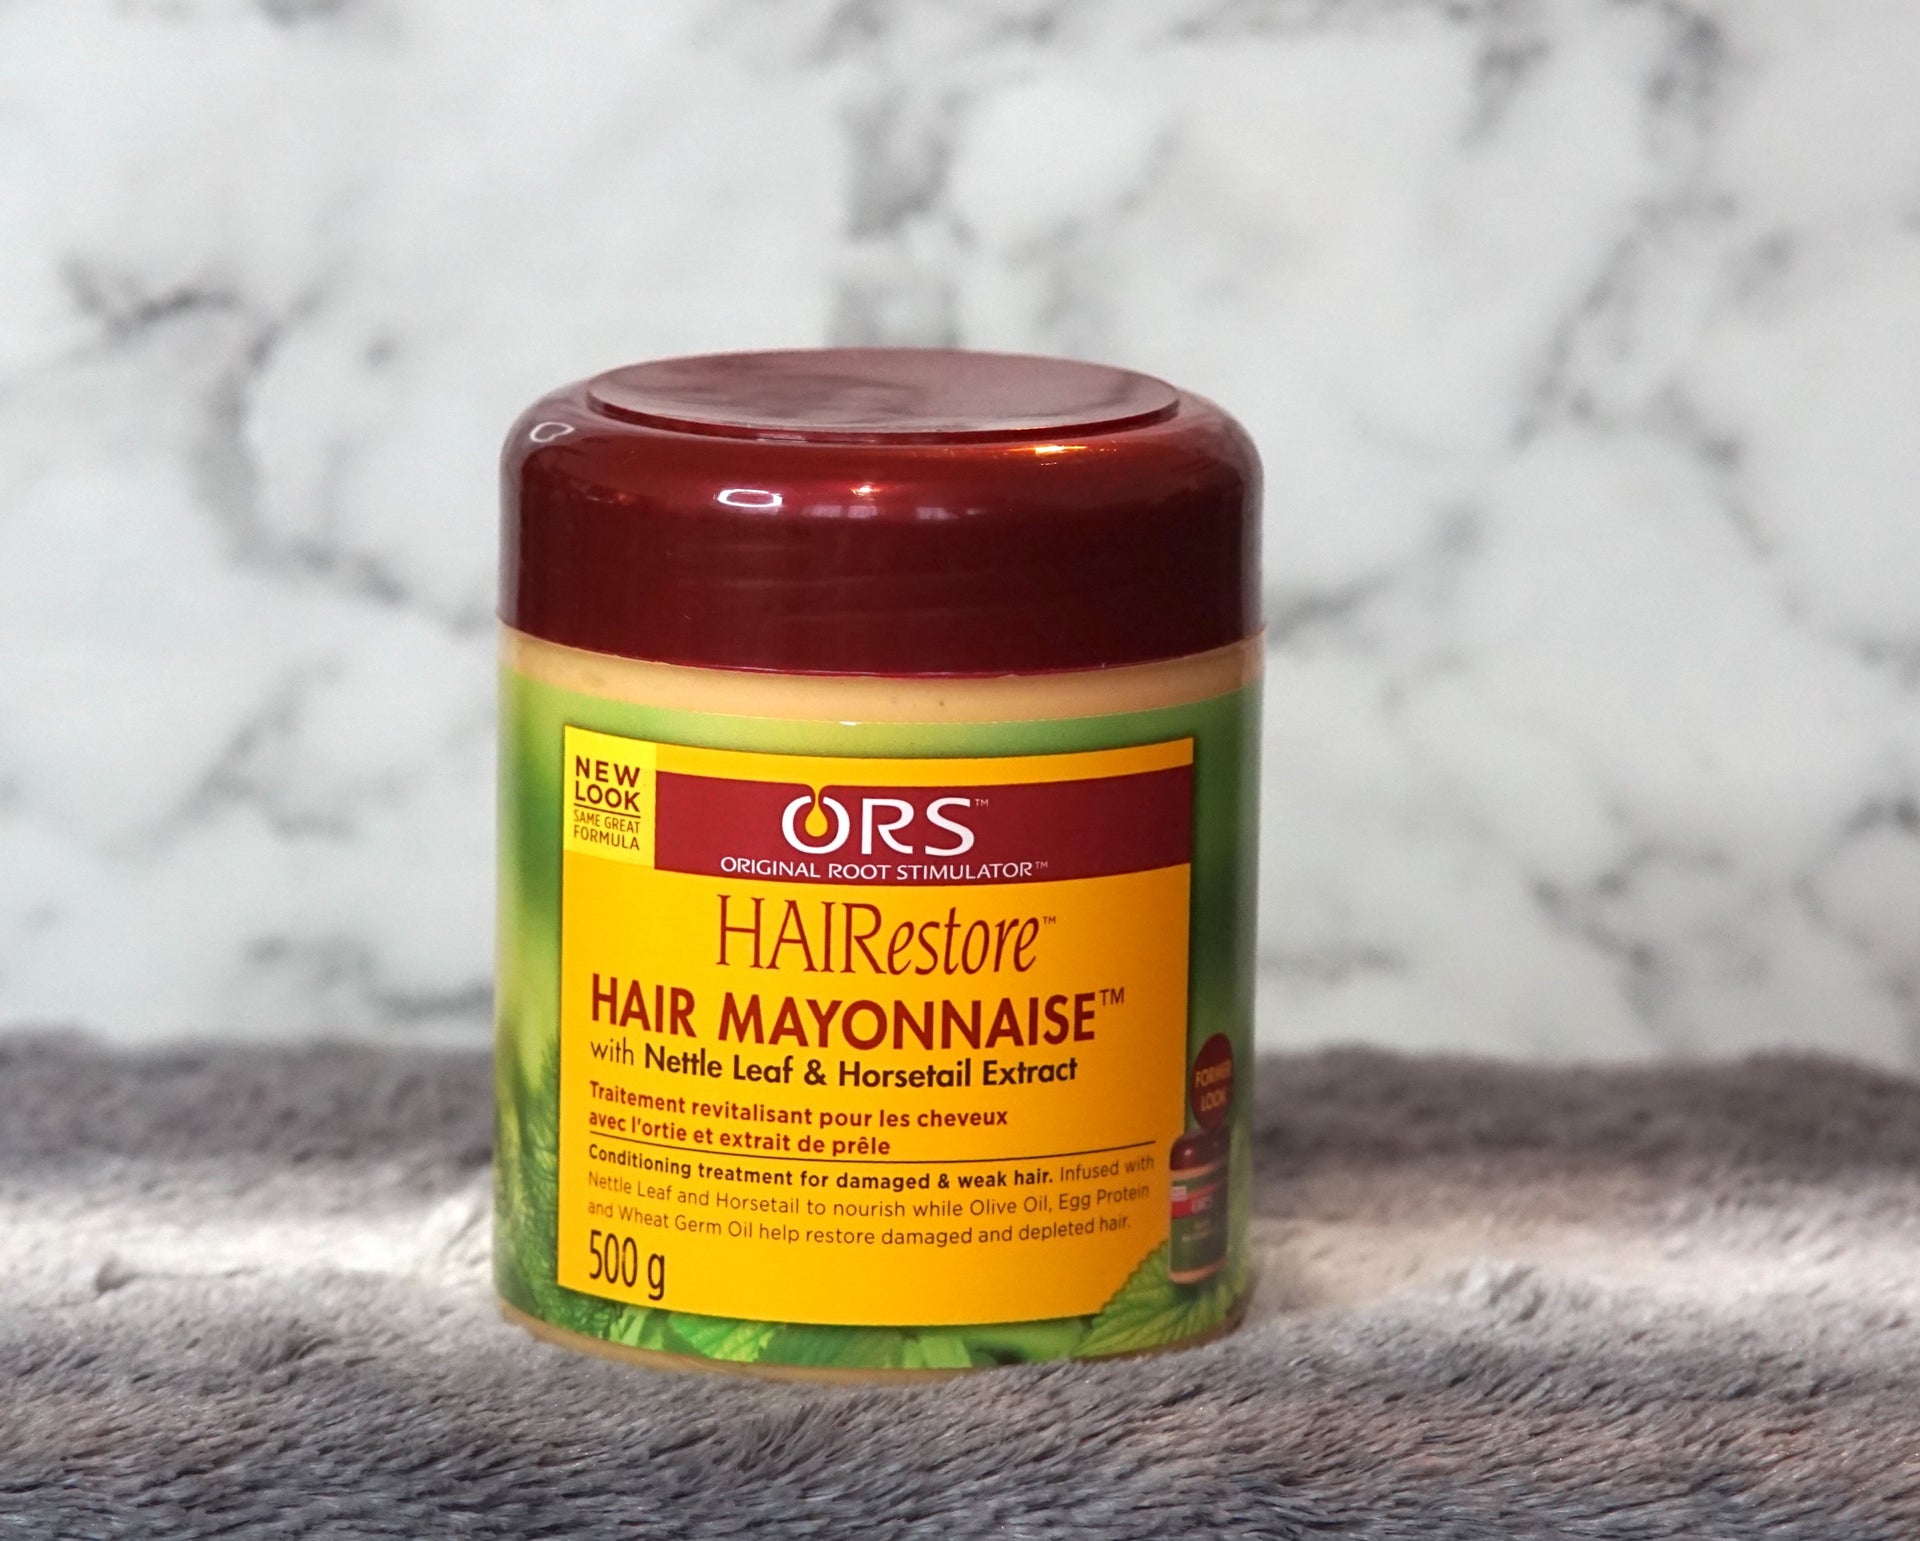 ORS HAIRestore Hair Mayonnaise with Nettle Leaf and Horsetail Extract (16.0  oz)